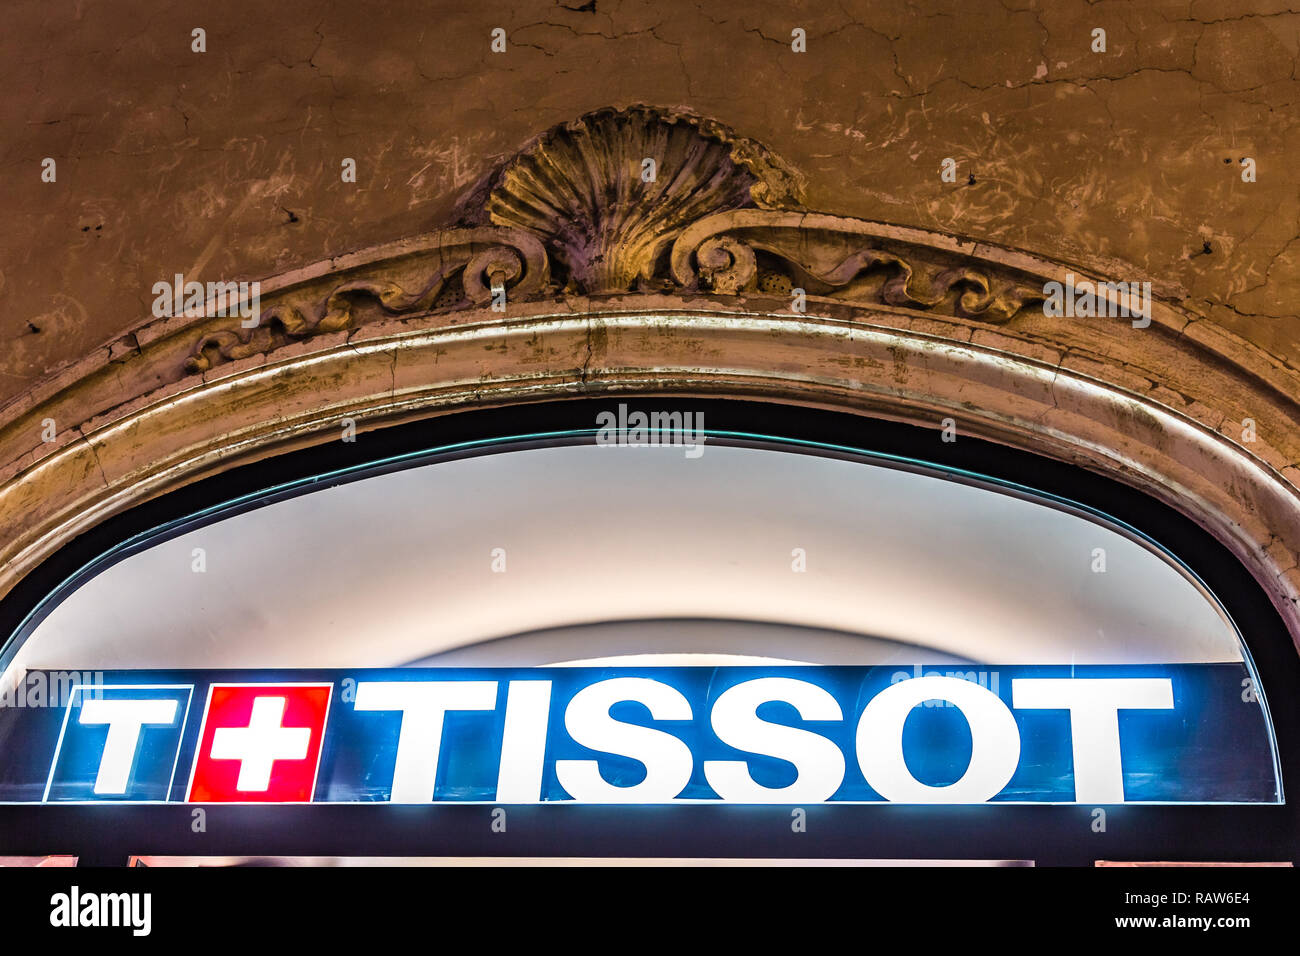 ROME, ITALY - JANUARY 3, 2019: lights are enlightening TISSOT logo on storefront at night Stock Photo